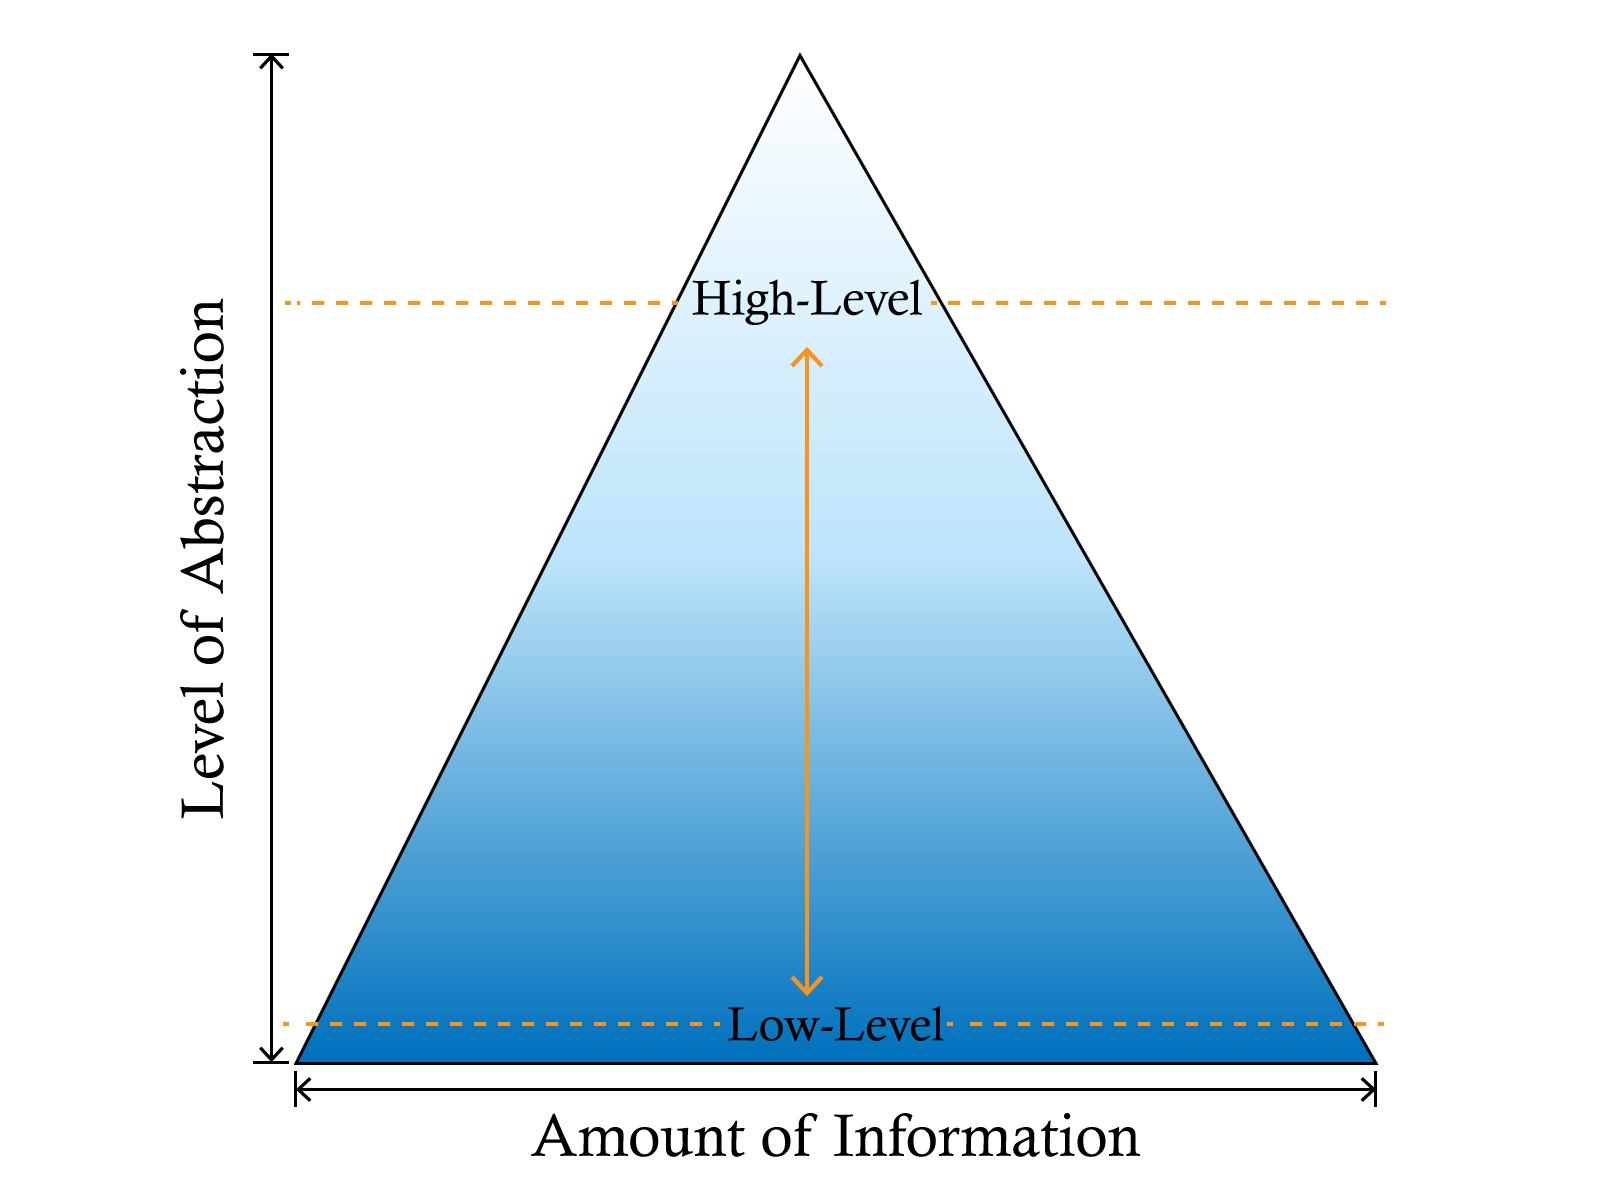 The Abstraction Pyramid